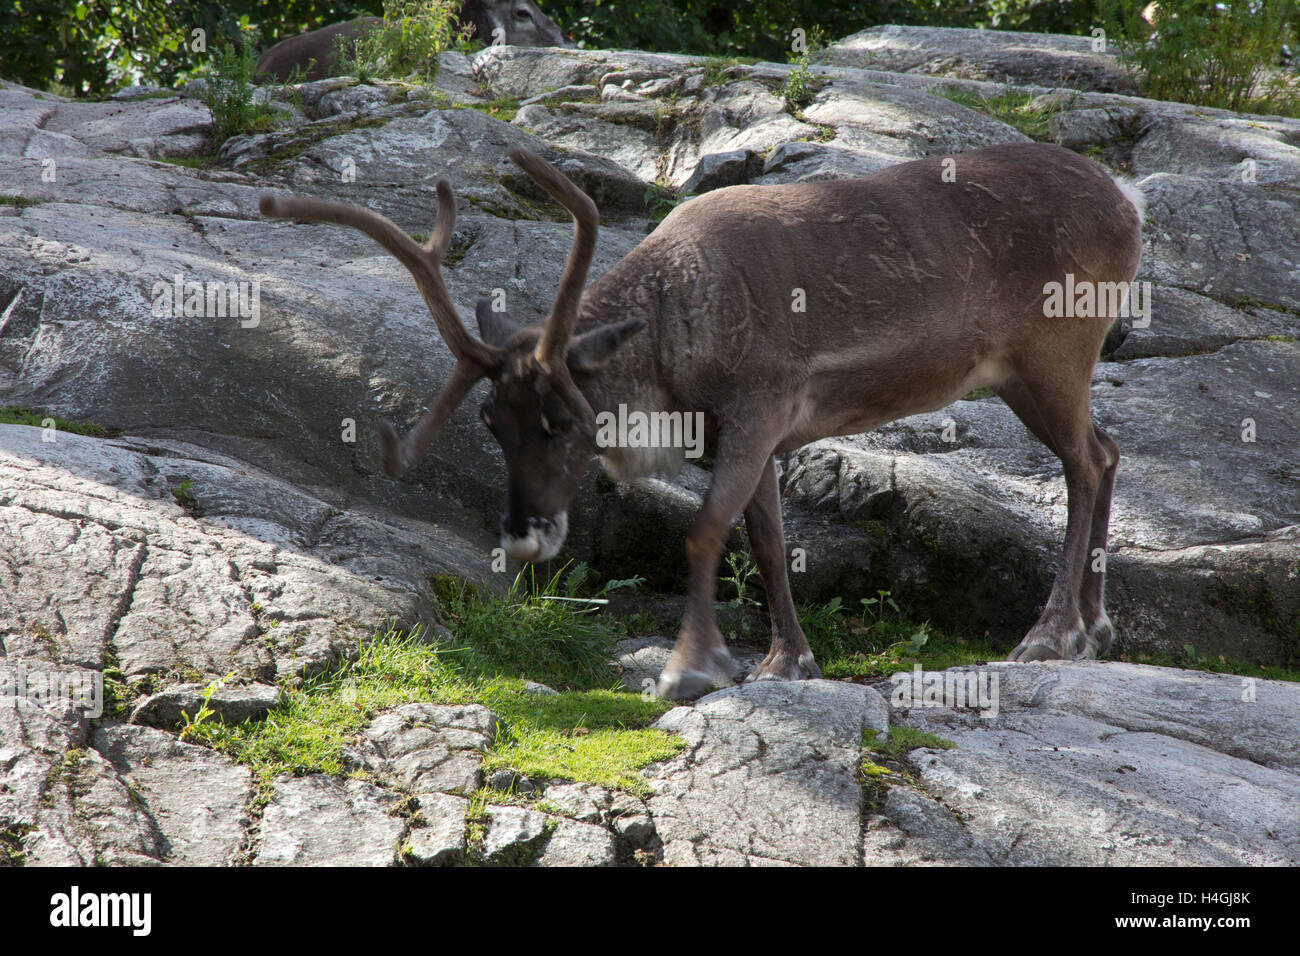 A zoo at Skansen, the world's first open-air museum, features Nordic animals, such as the reindeer.  Stockholm, Sweden. Stock Photo